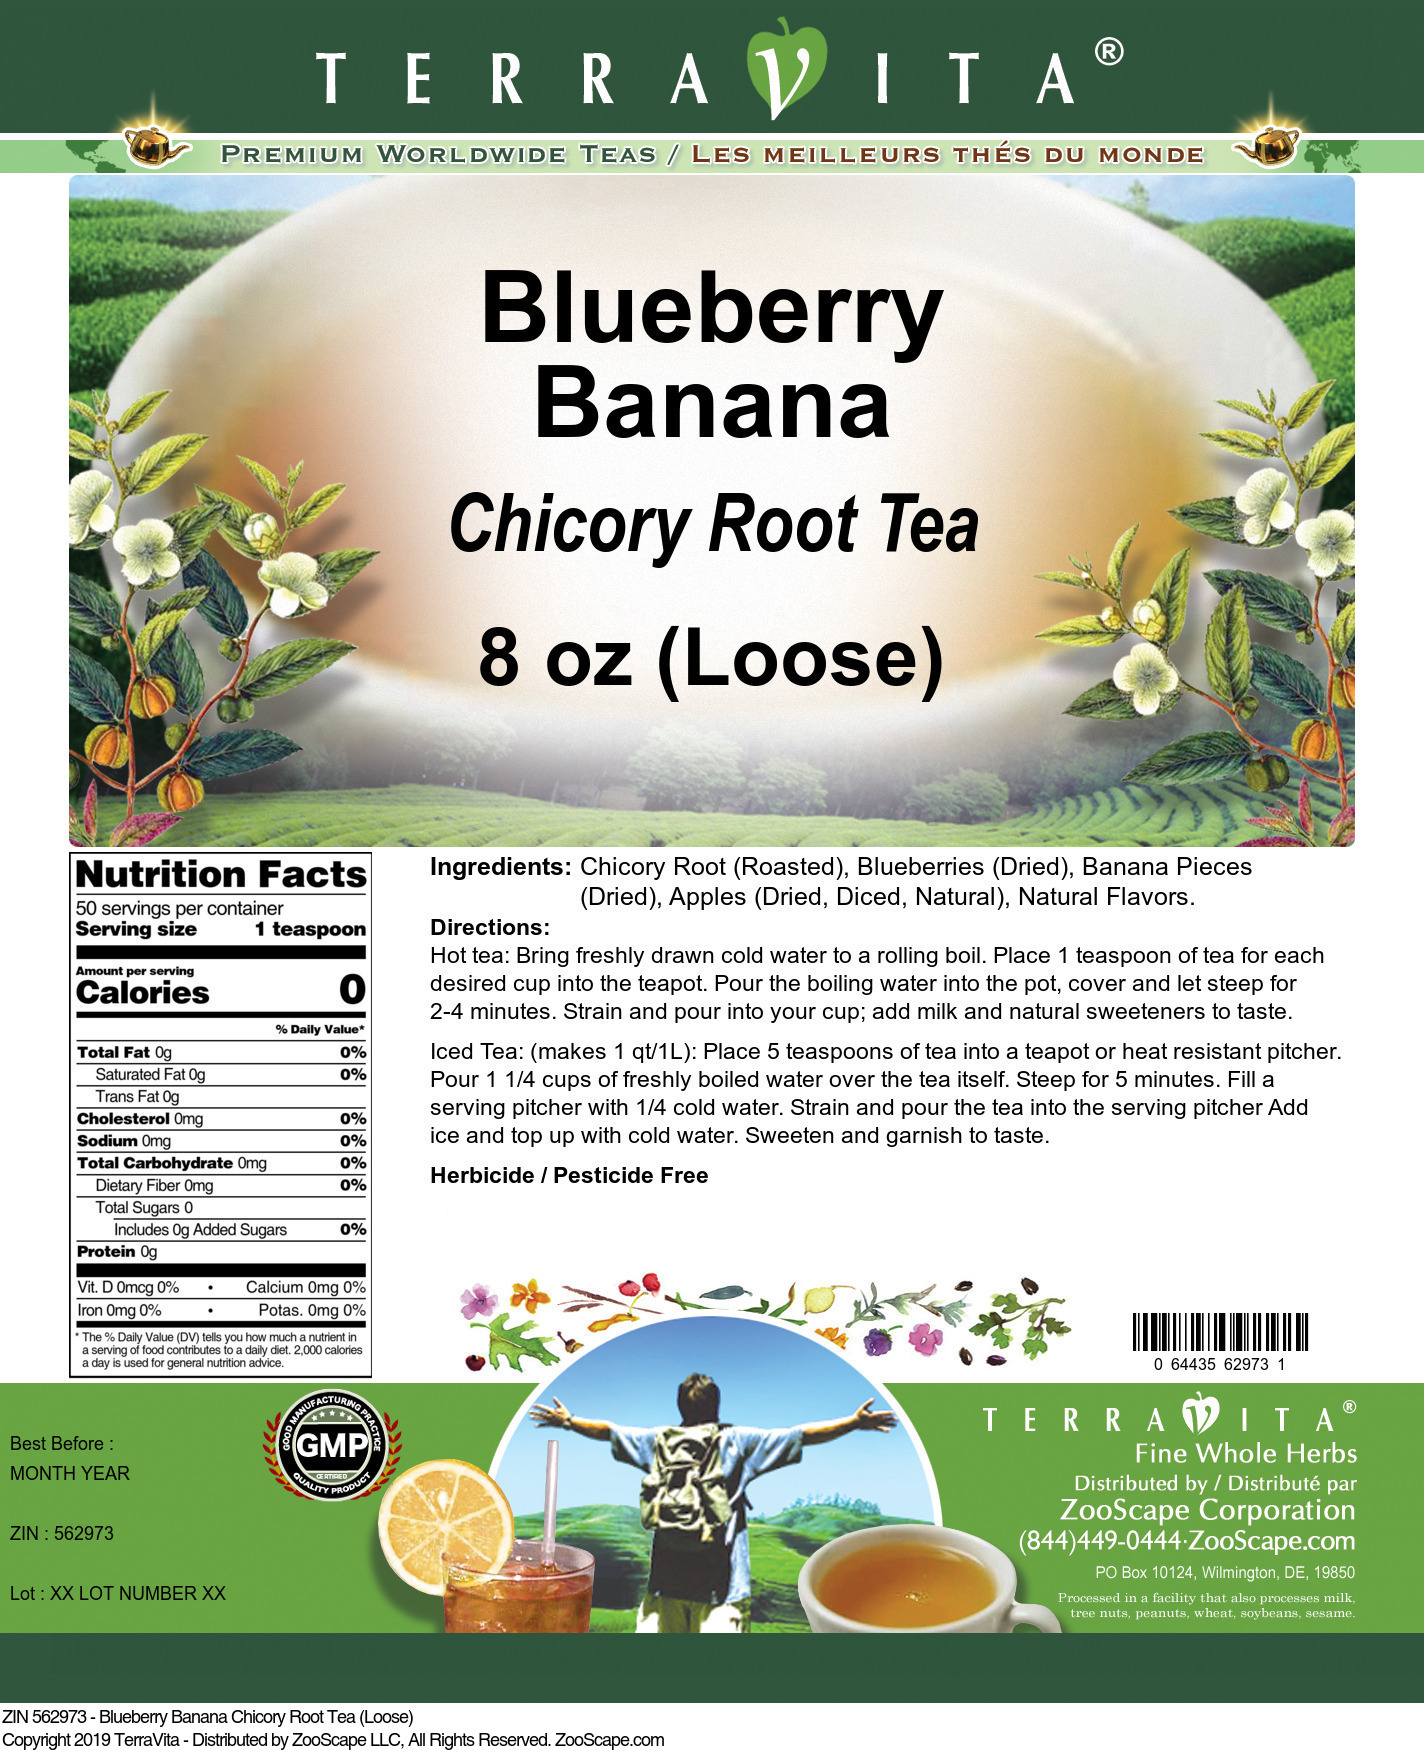 Blueberry Banana Chicory Root Tea (Loose) - Label